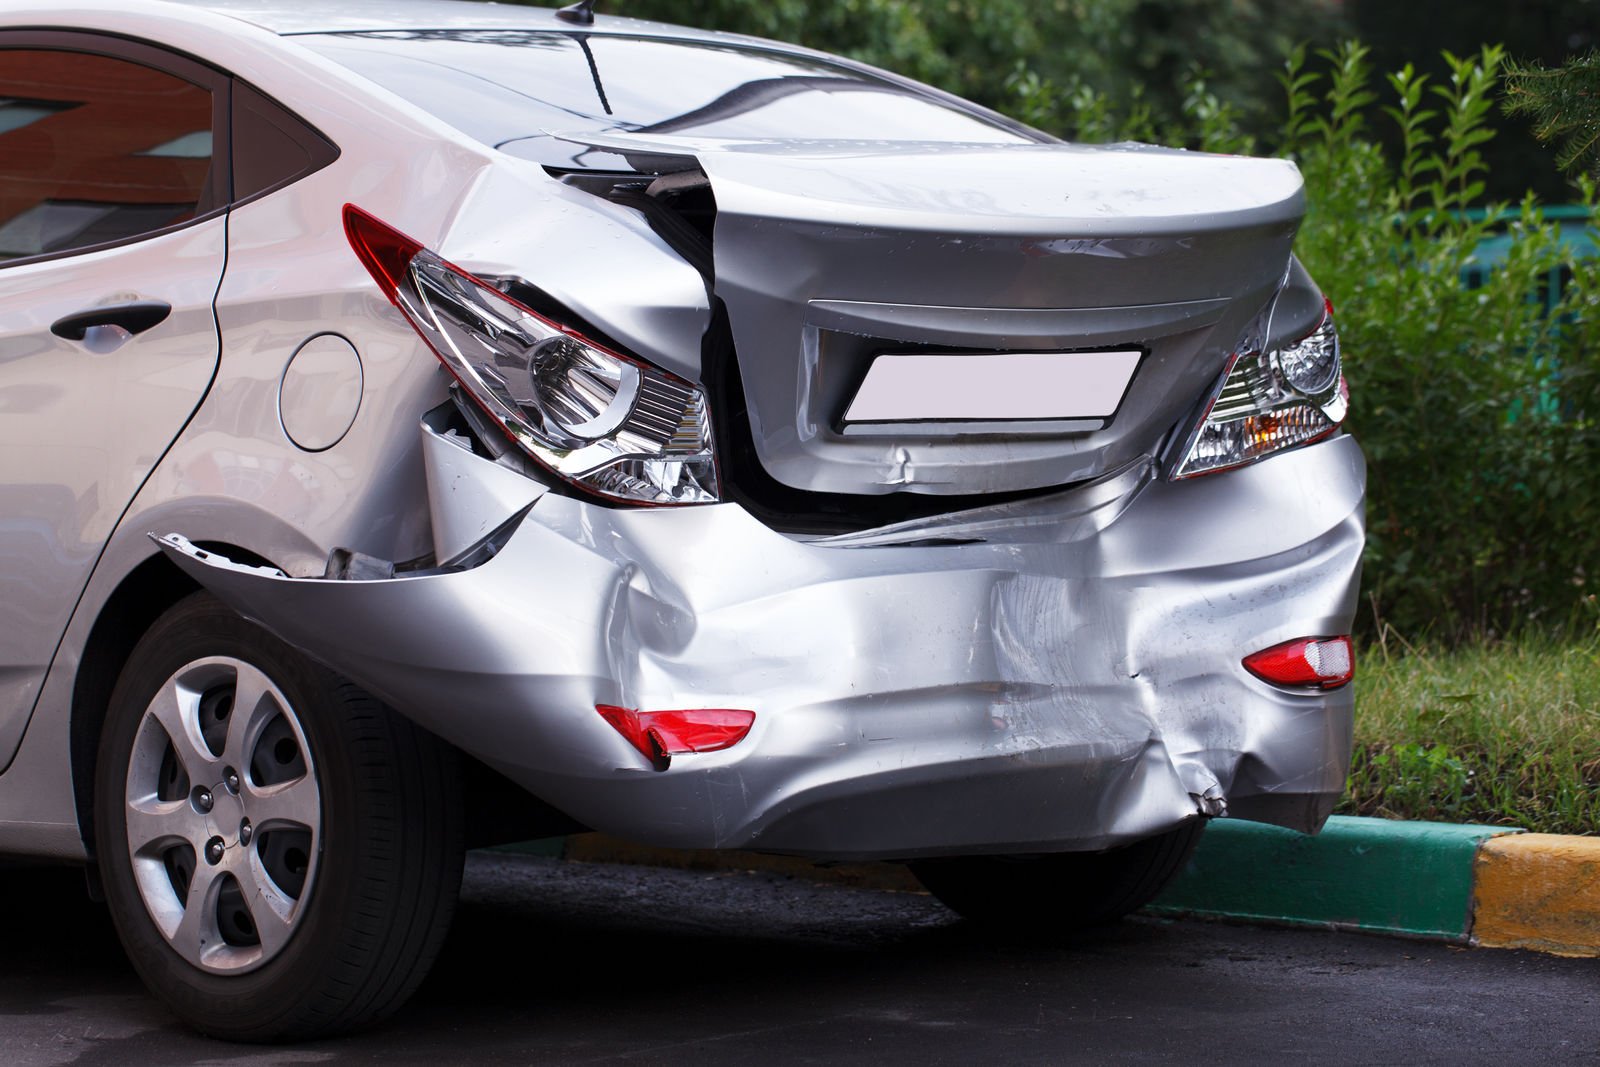 Does car insurance cover excluded drivers?